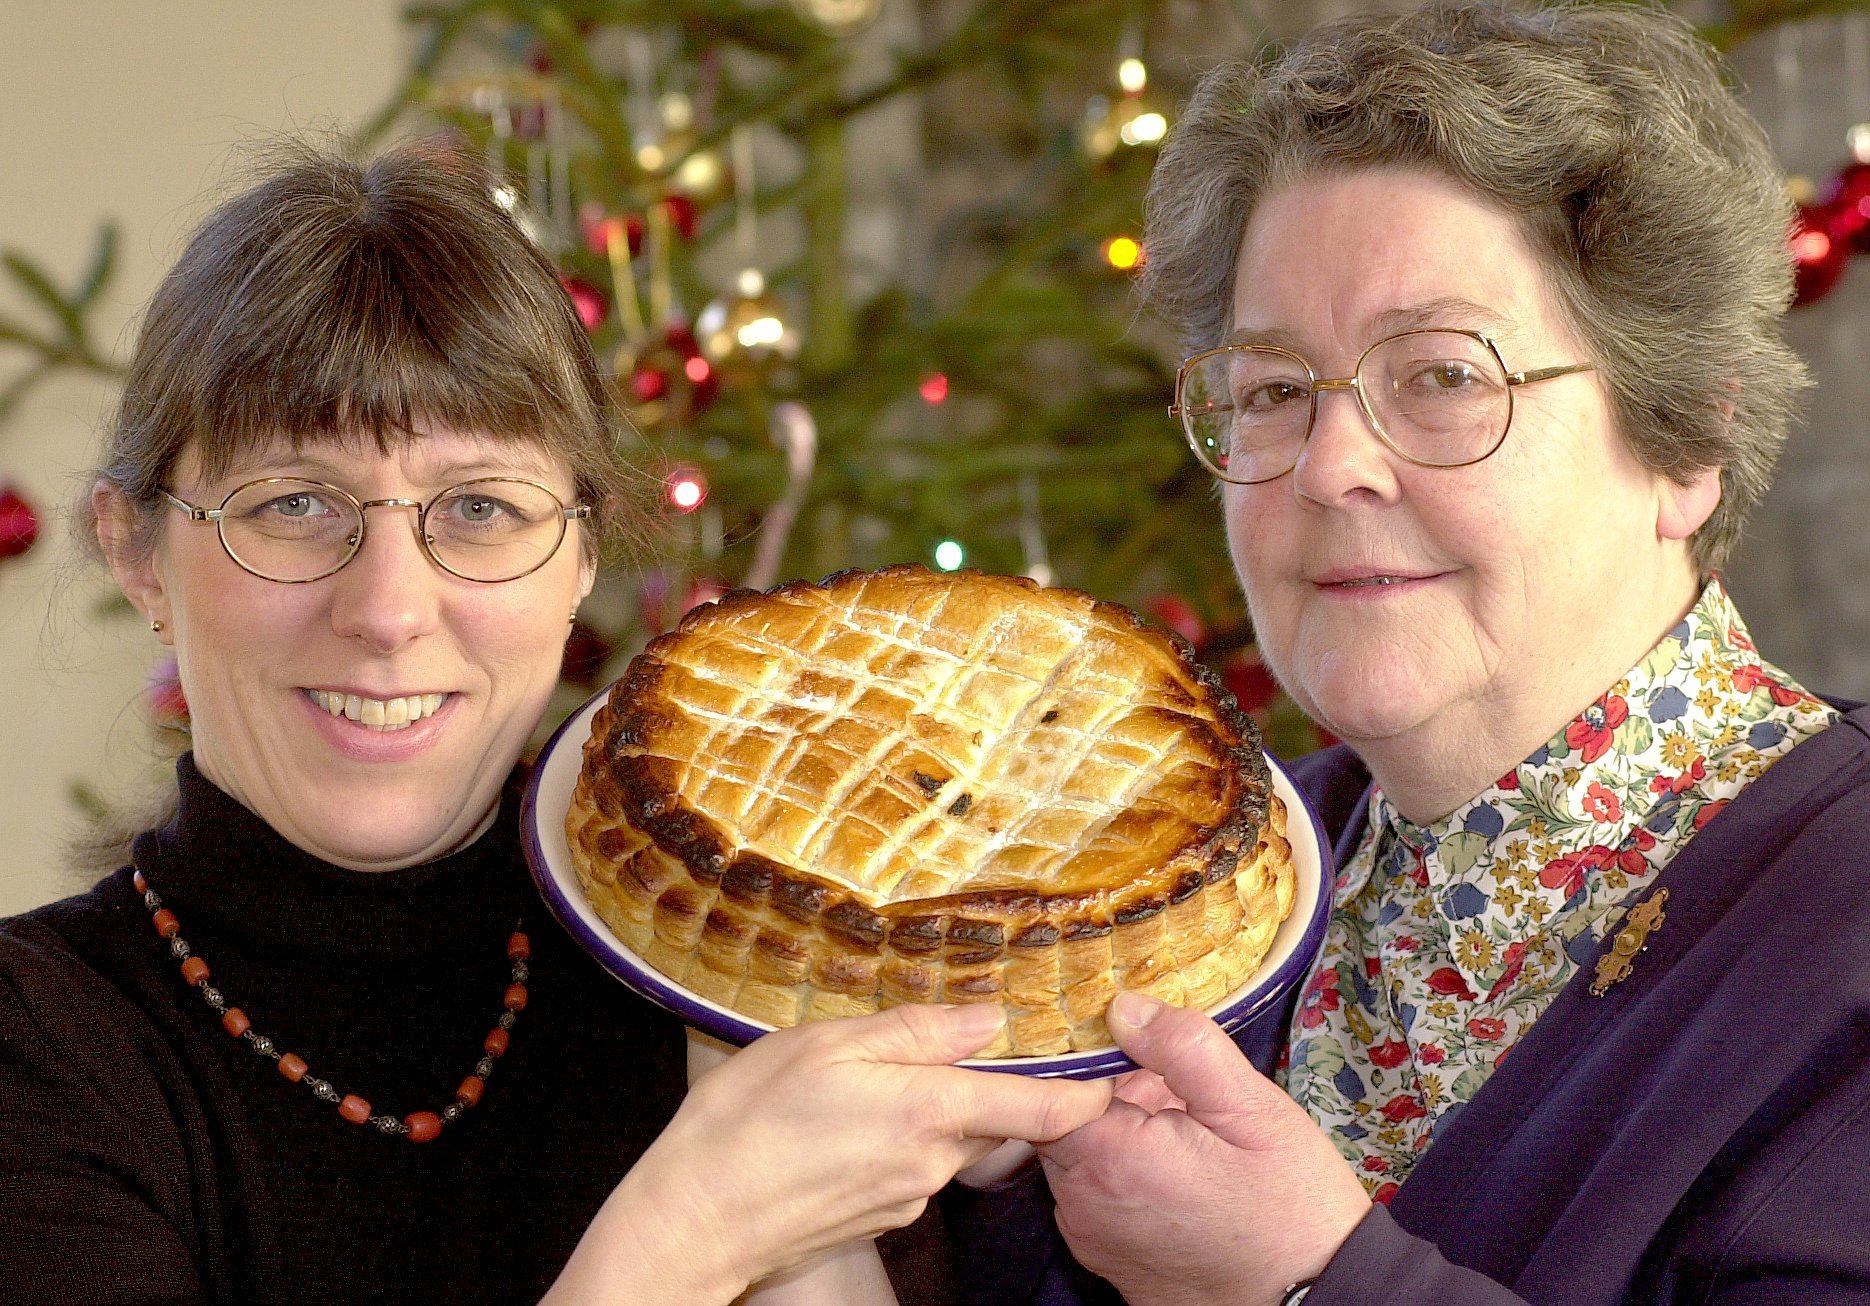 Laura Mason, left, and Ann Rycraft holding the Twelfth Night Cake for the Twelfth Night party at Jacobs Well where they will present a cheque for £400 to St Leonards Hospice - from The Press, January 2001